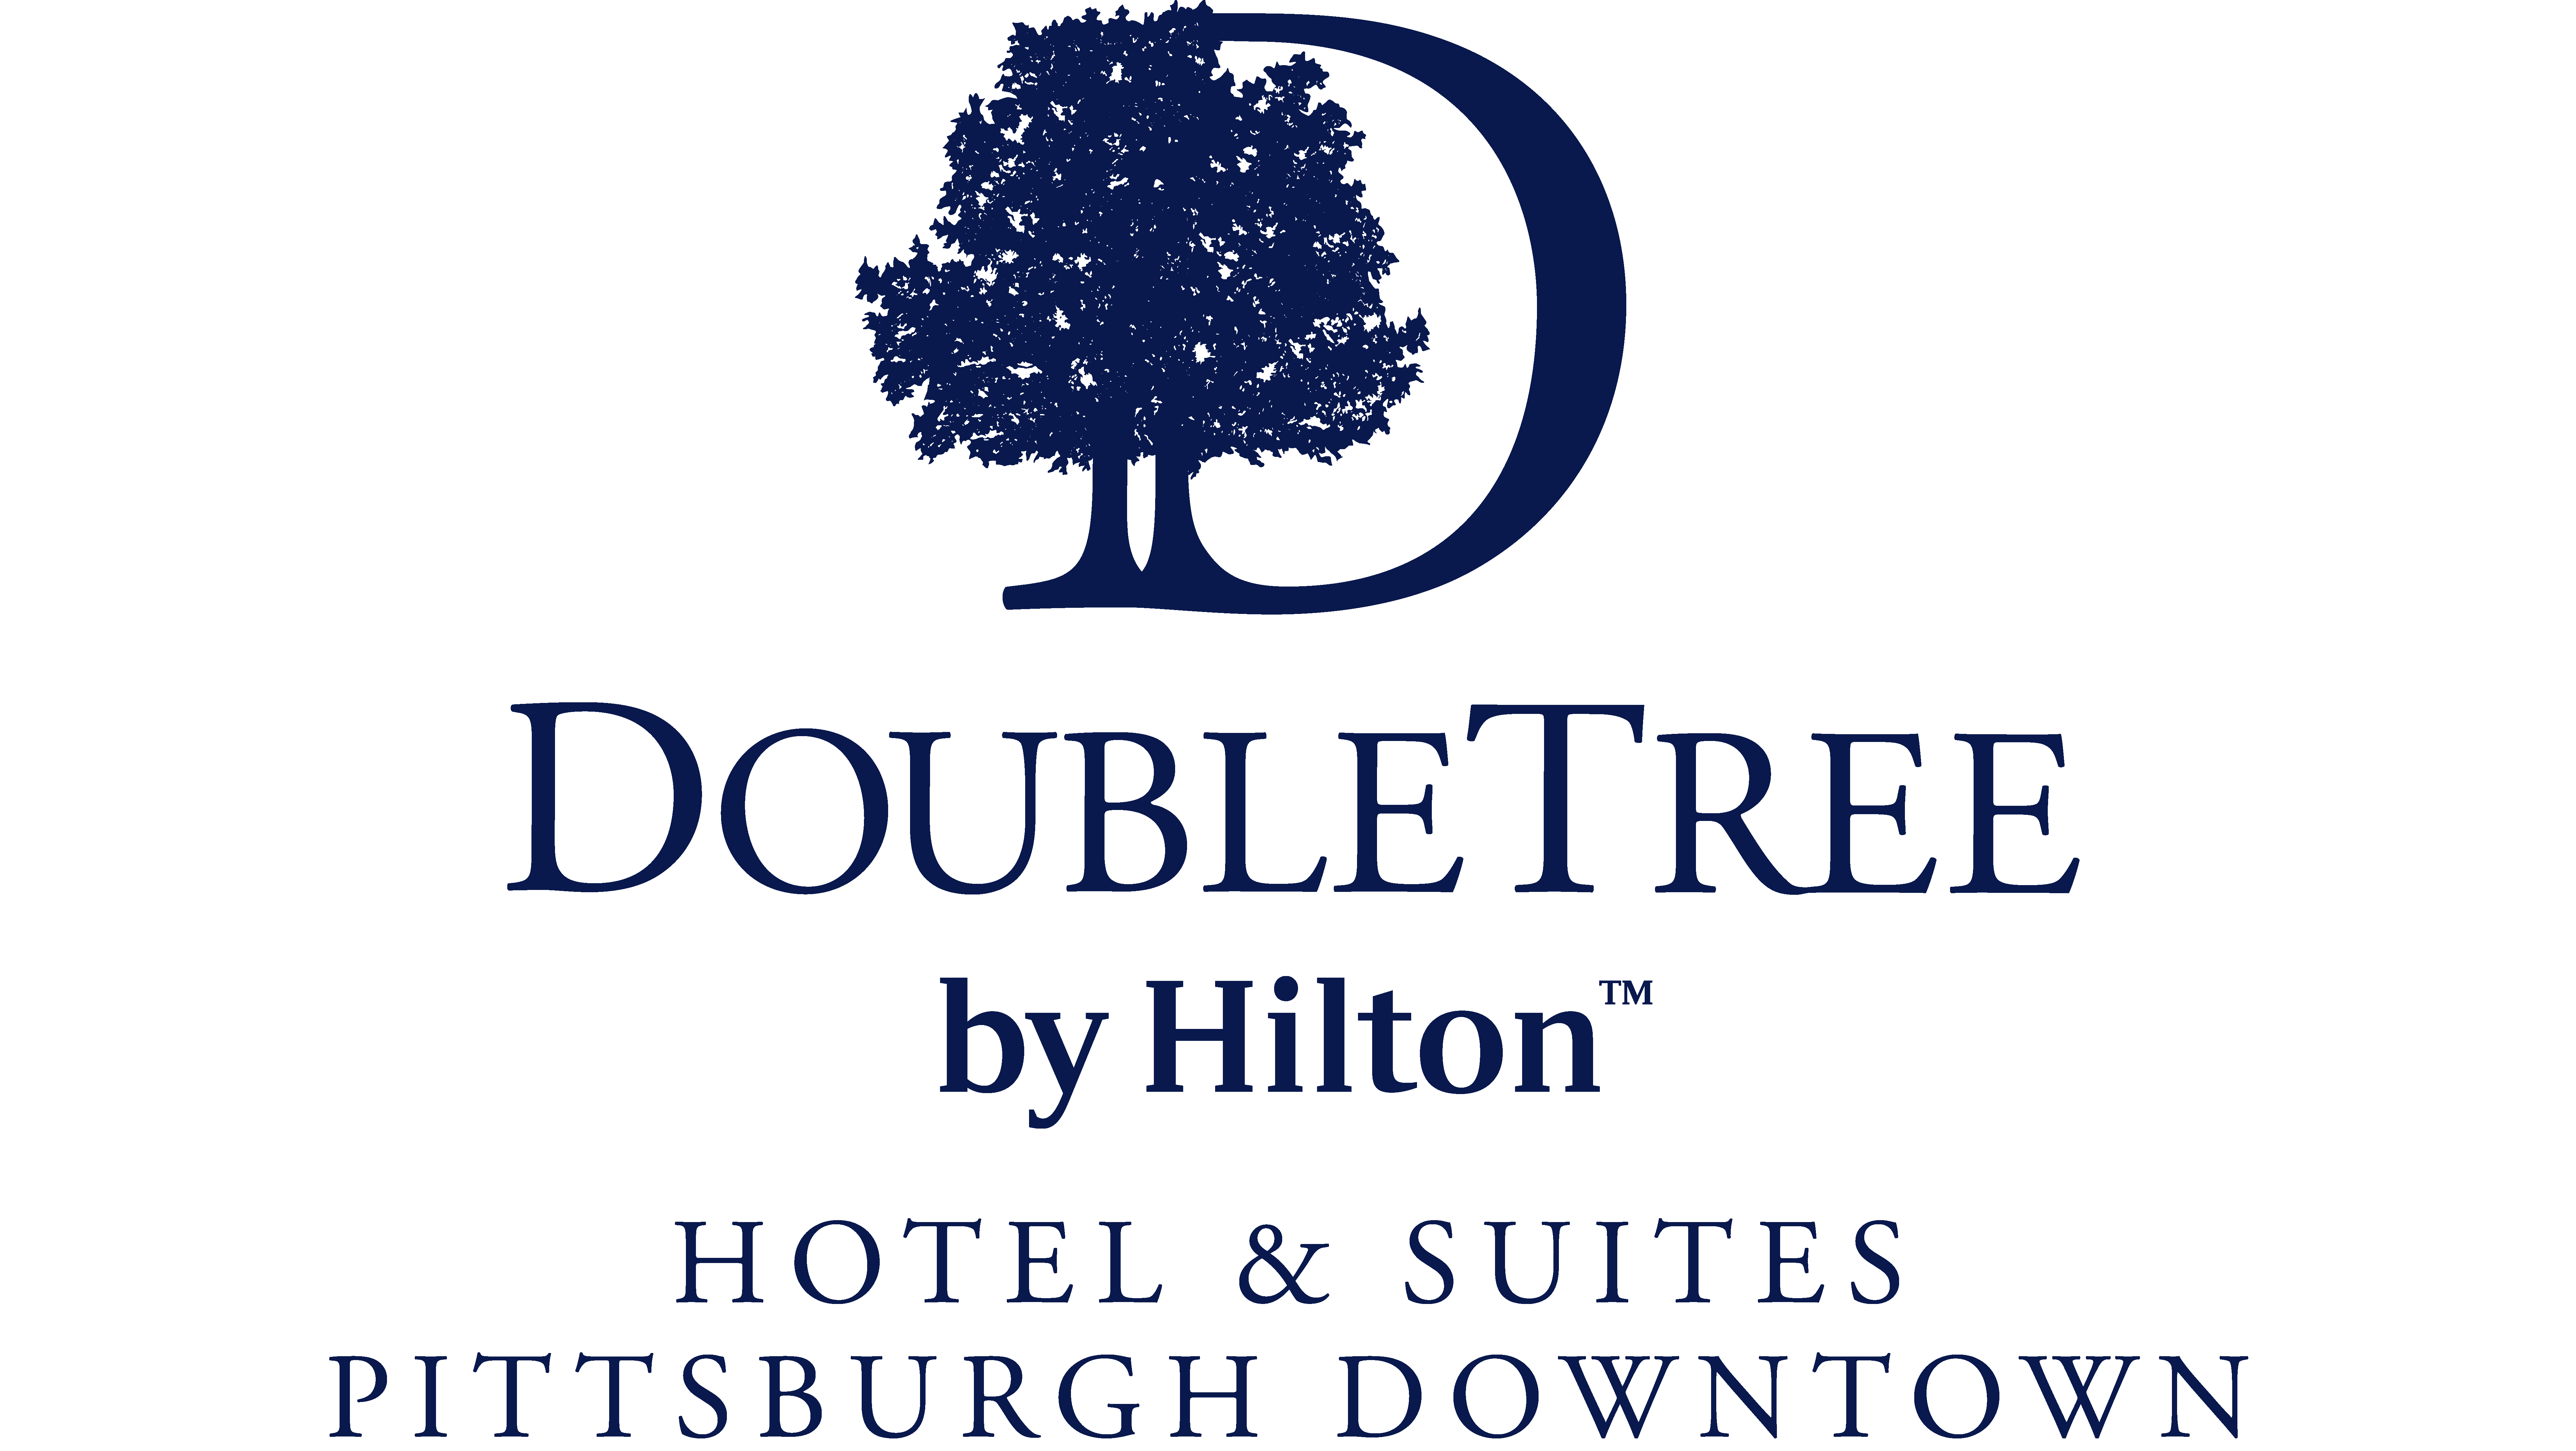 https://www.hilton.com/en/hotels/pitdtdt-doubletree-hotel-and-suites-pittsburgh-downtown/